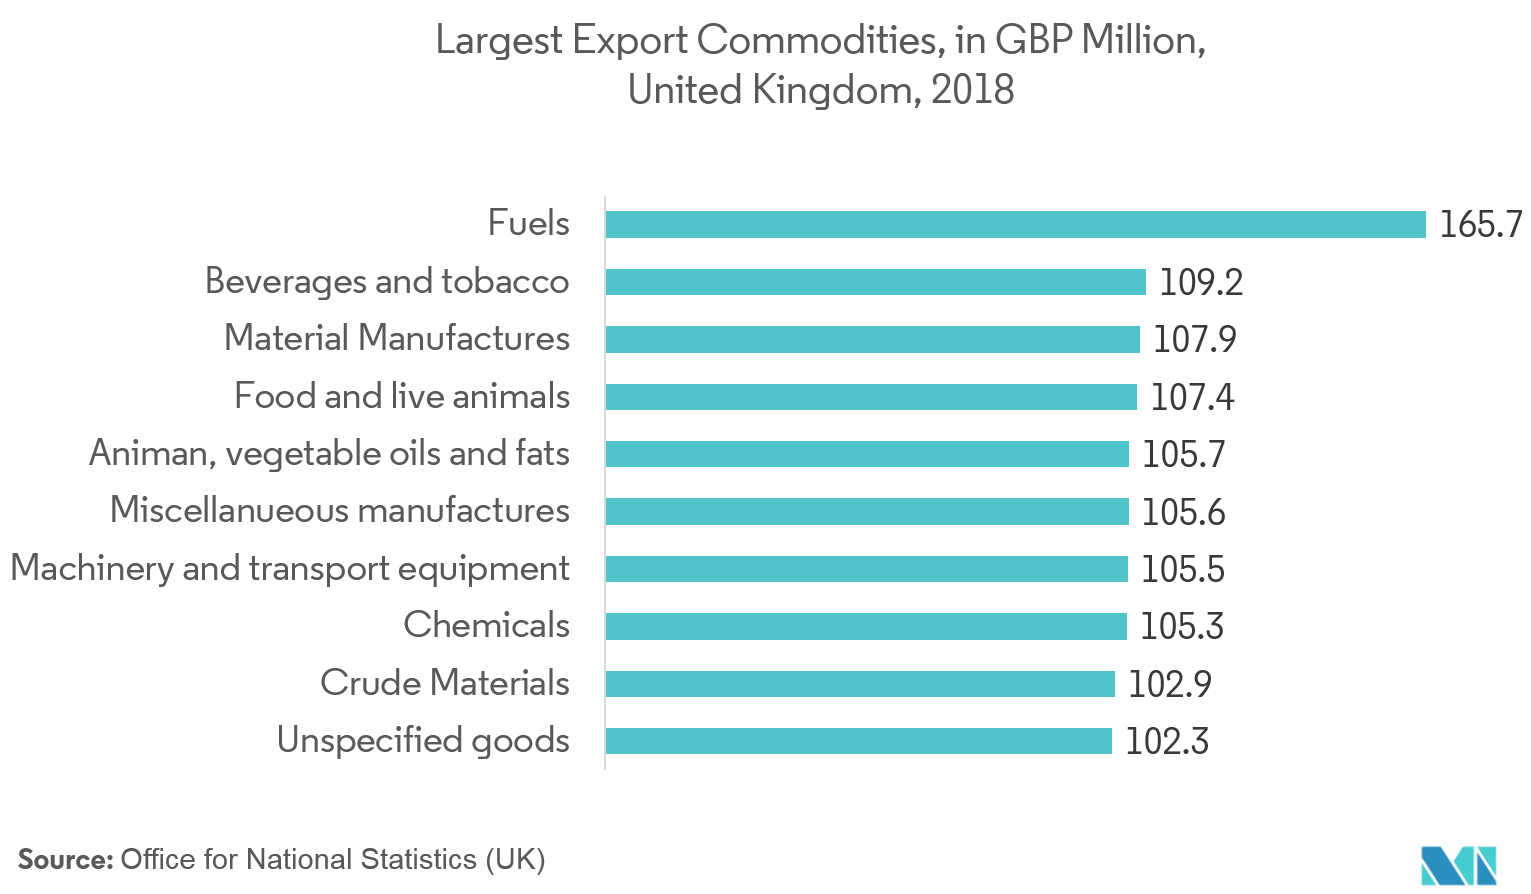 Largest export commodities of the United Kingdom (UK) in 2018